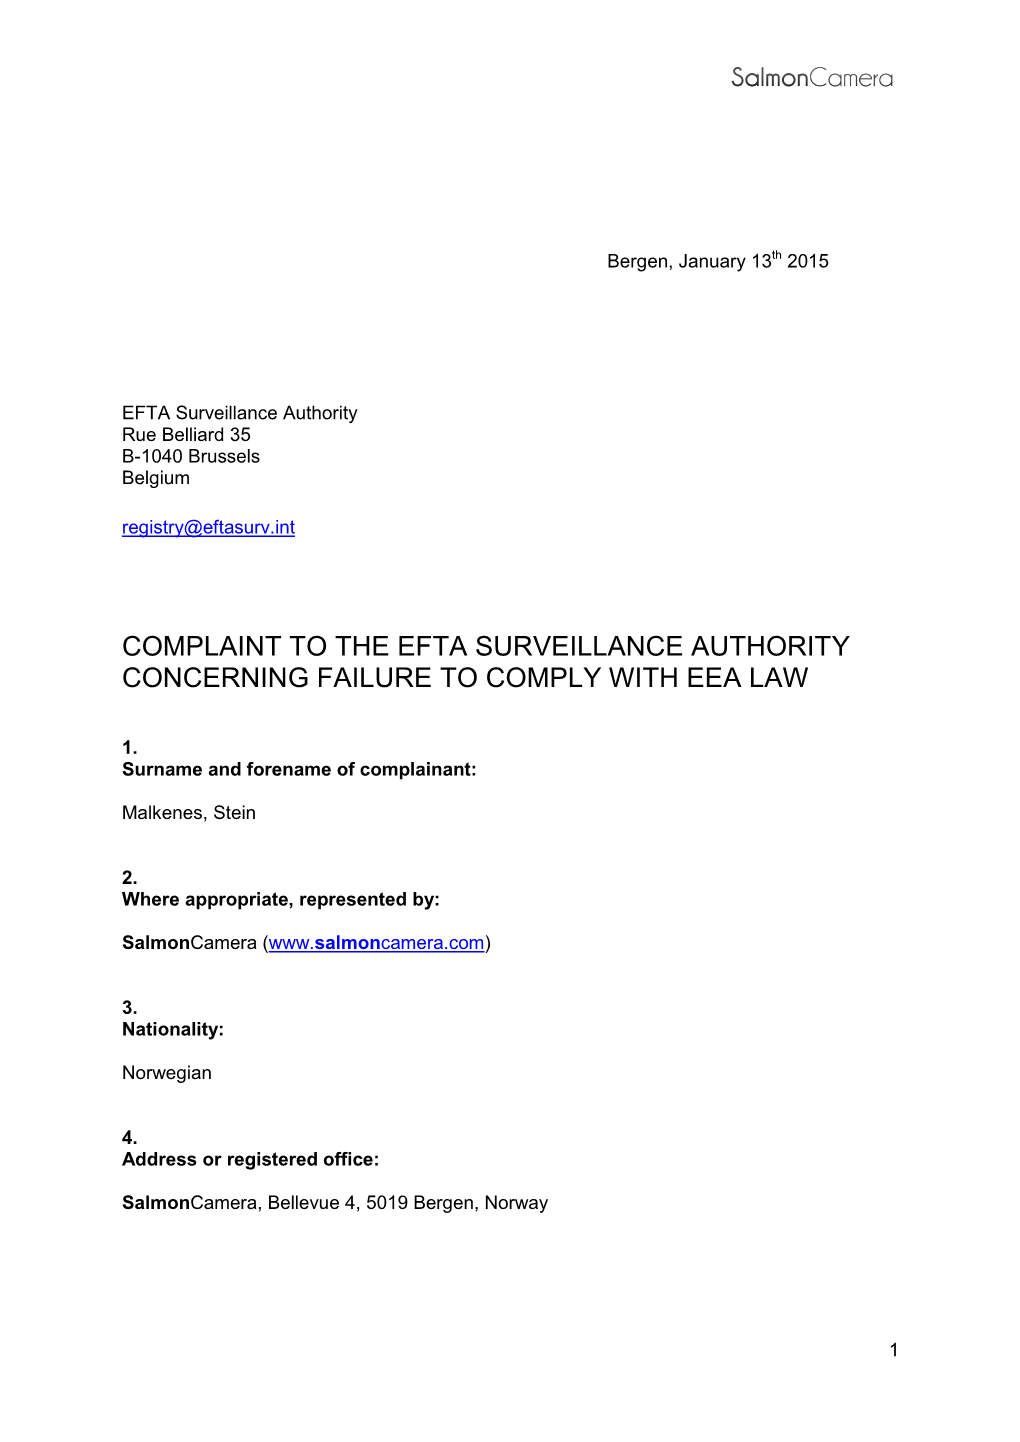 Complaint to the Efta Surveillance Authority Concerning Failure to Comply with Eea Law